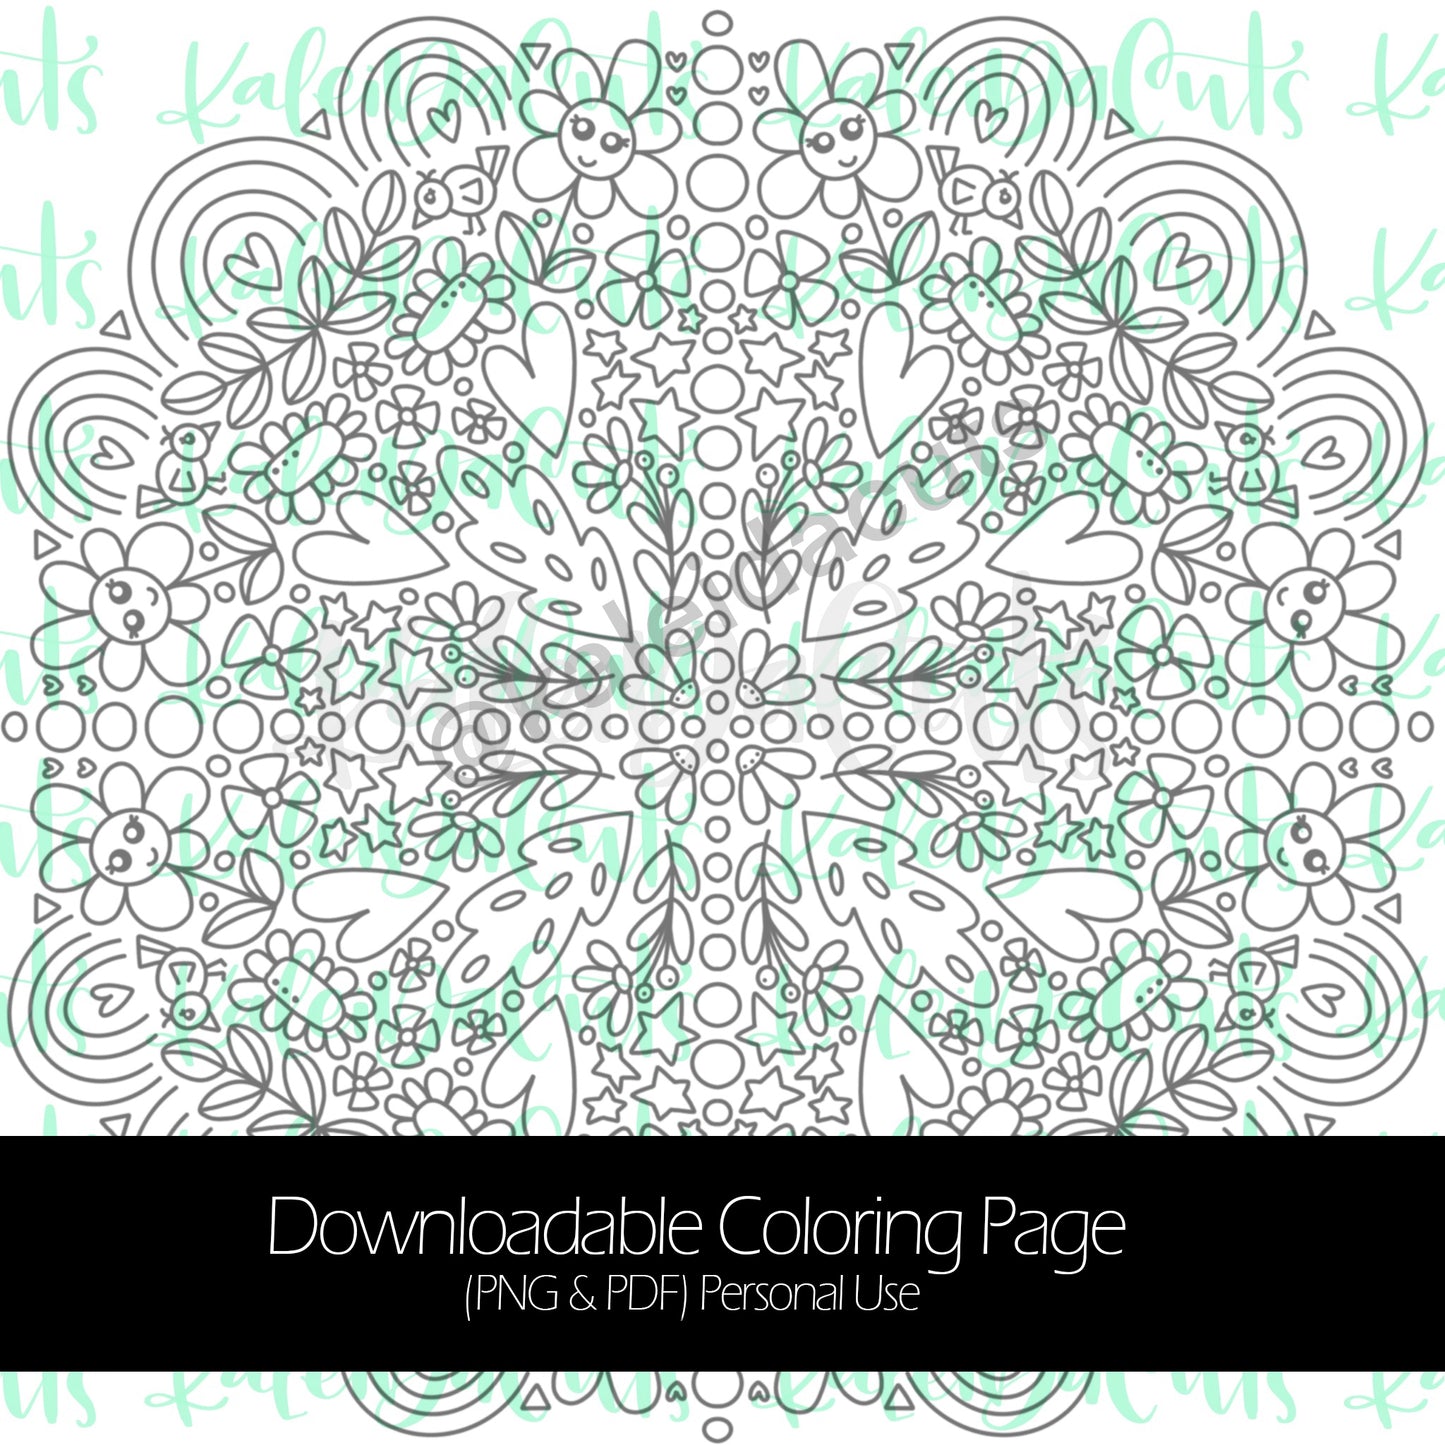 Spring 2020 Mandala Downloadable Coloring Page. Personal Use.